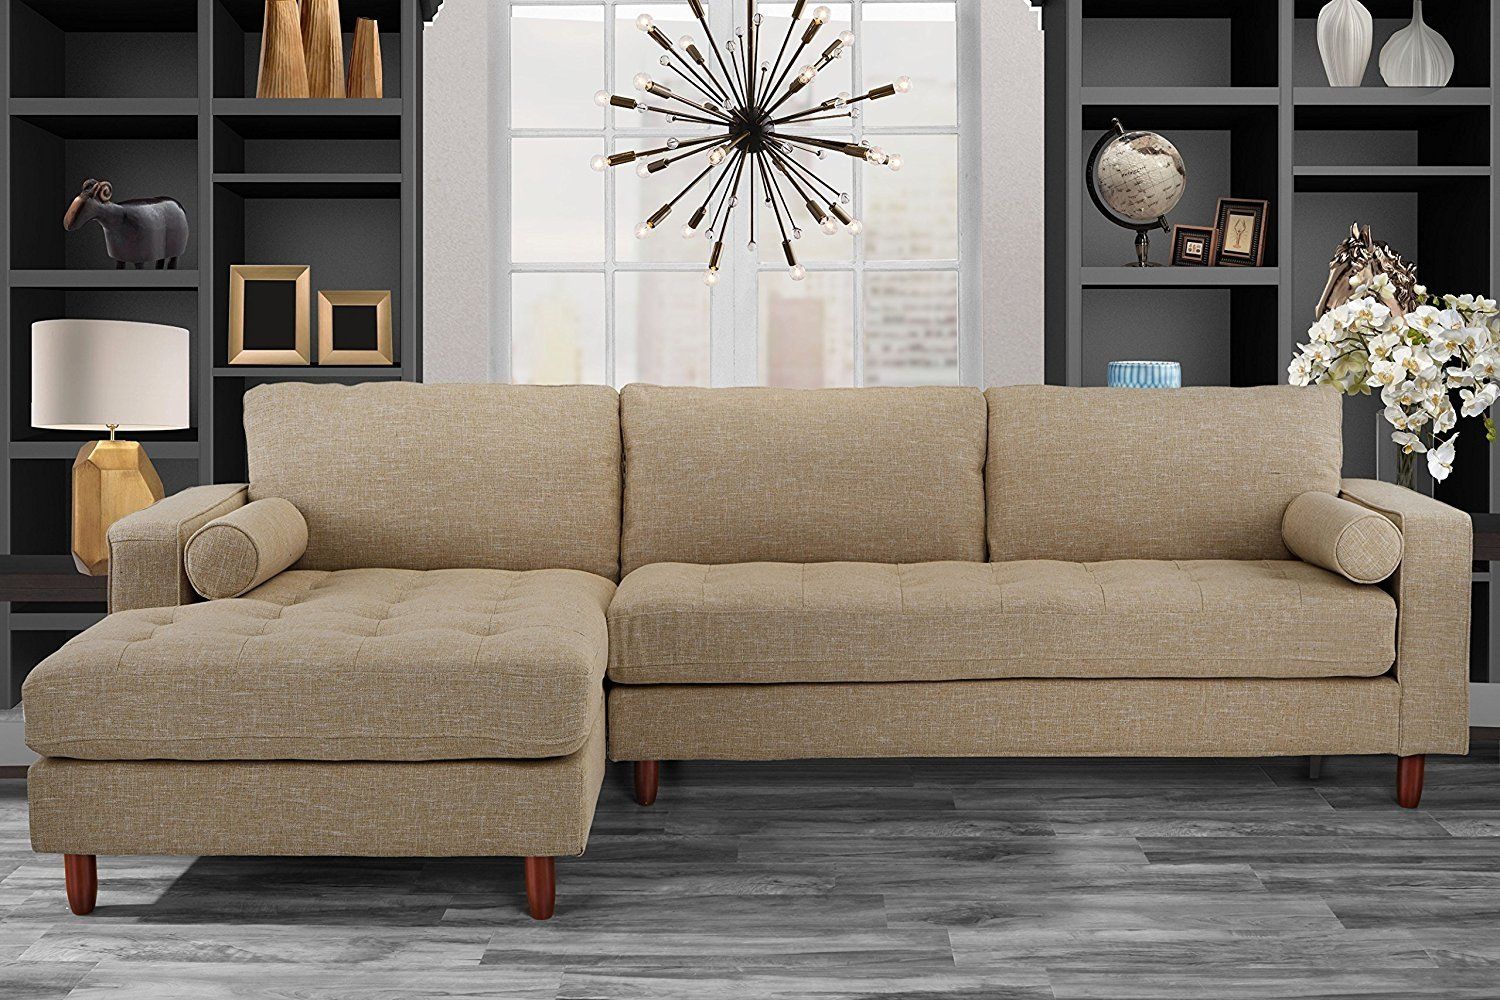 Mid Century Modern Tufted Fabric Sectional Sofa, L Shape Couch Beige With Regard To Modern L Shaped Sofa Sectionals (Gallery 8 of 20)